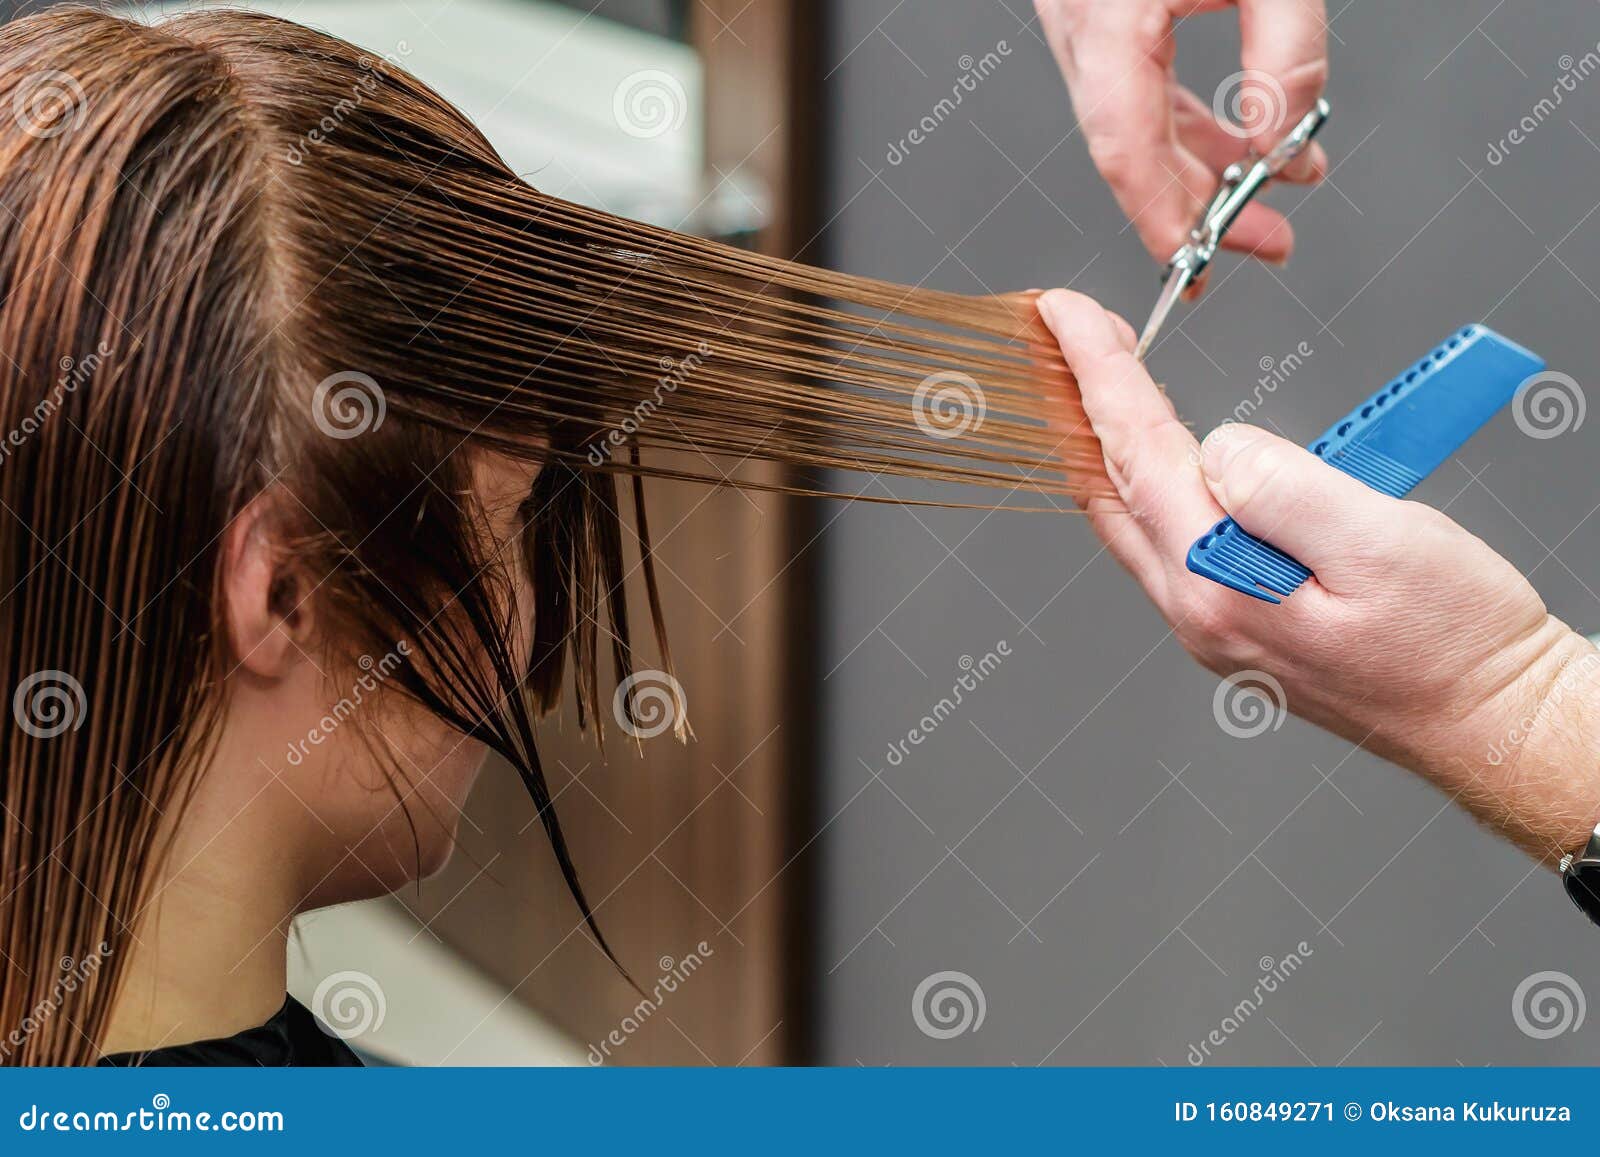 Professional Hairdresser Is Cutting Woman S Long Hair Tips In